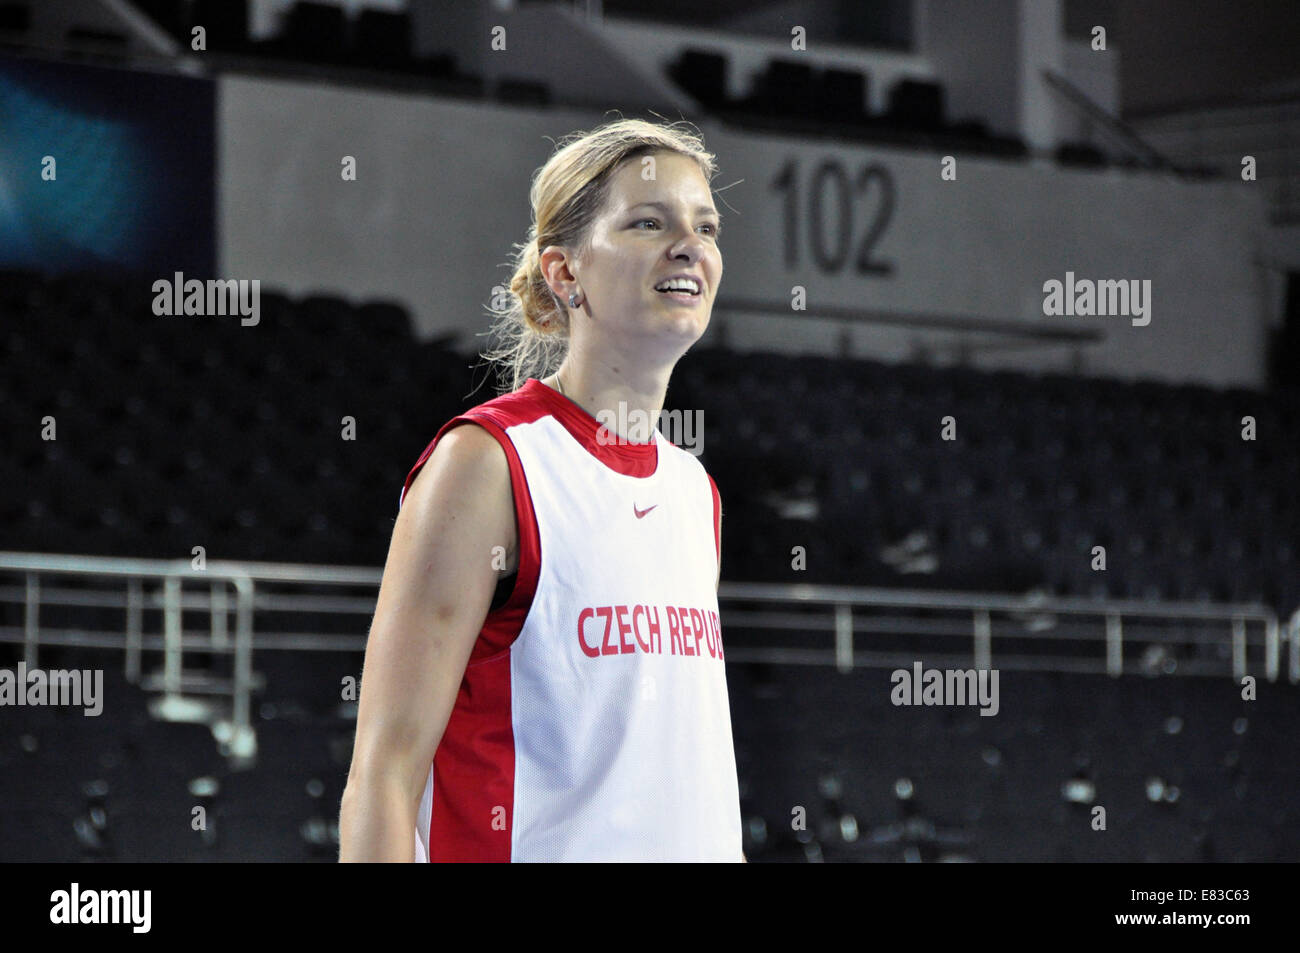 Czech player Eva Viteckova trains prior to the match against Spain team in indoor sporting arena Ankara Arena, in which these days are played 2014 FIBA World Championship for Women matches, Ankara, Turkey, on Monday September 29, 2014. (CTK Photo/David Svab) Stock Photo